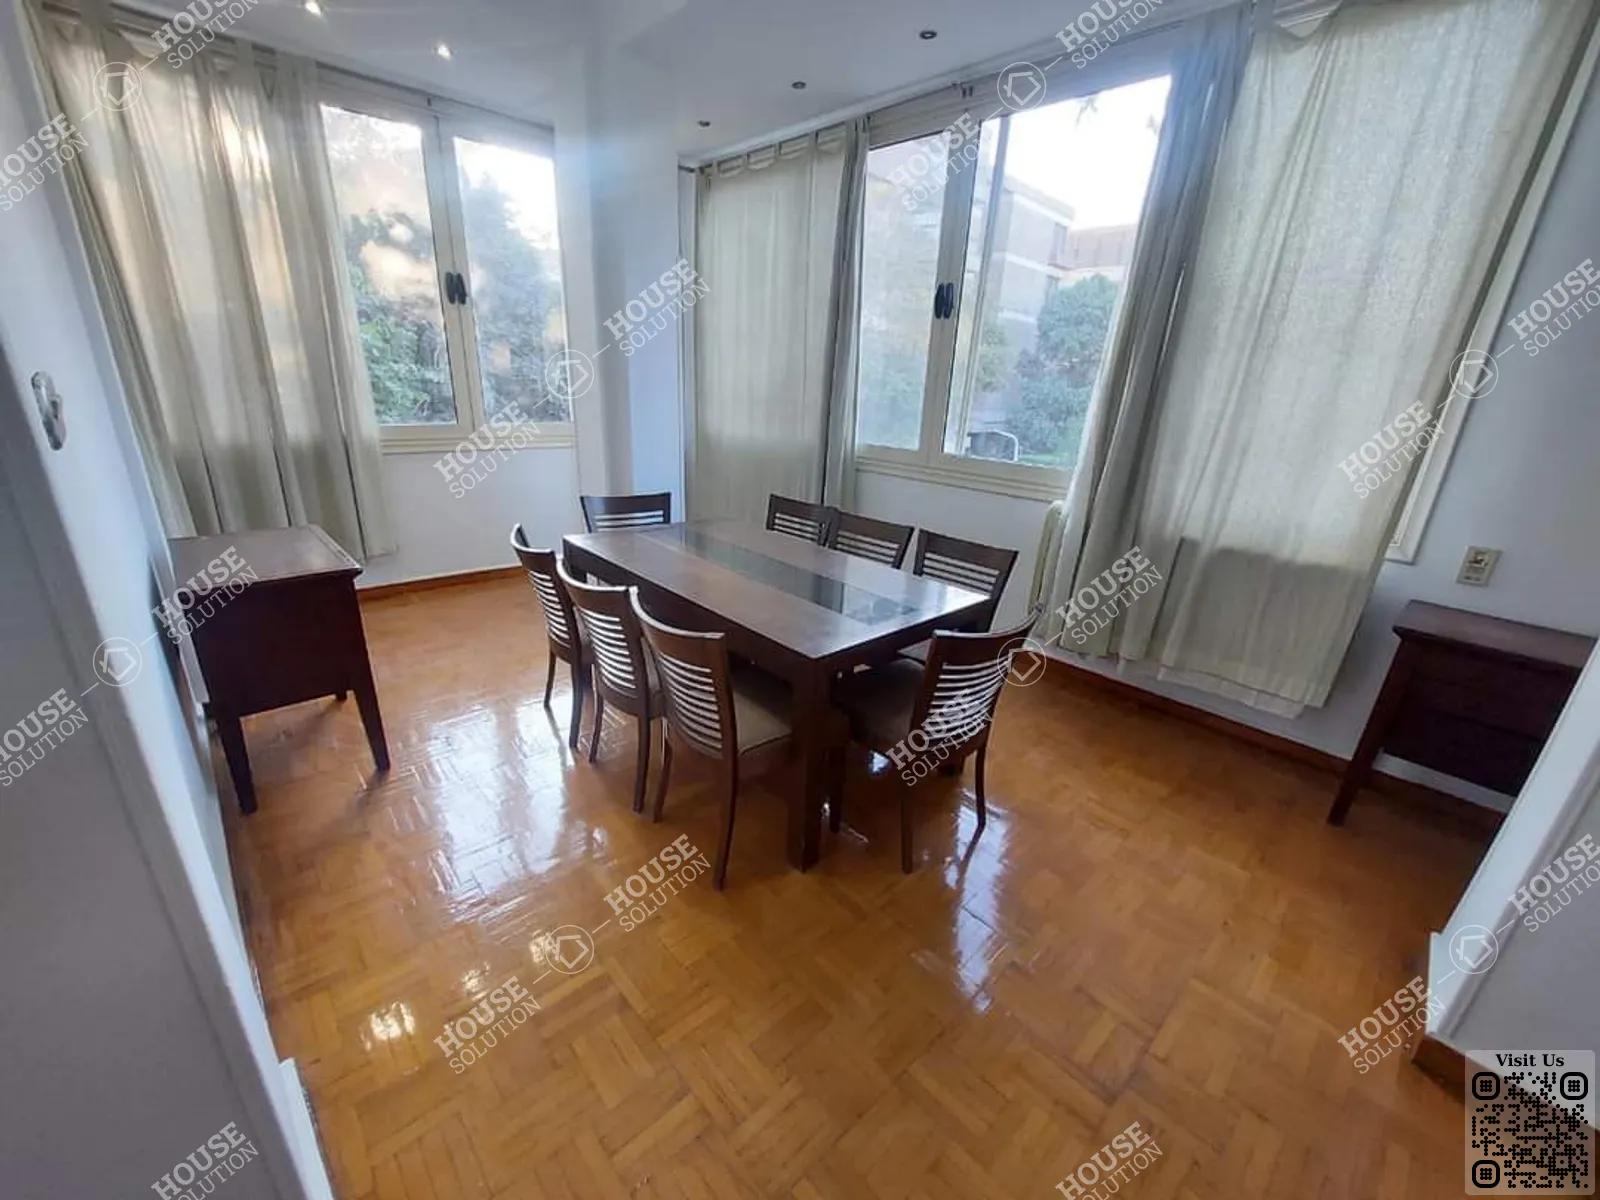 DINING AREA @ Apartments For Rent In Maadi Maadi Sarayat Area: 240 m² consists of 4 Bedrooms 3 Bathrooms Furnished 5 stars #5859-1